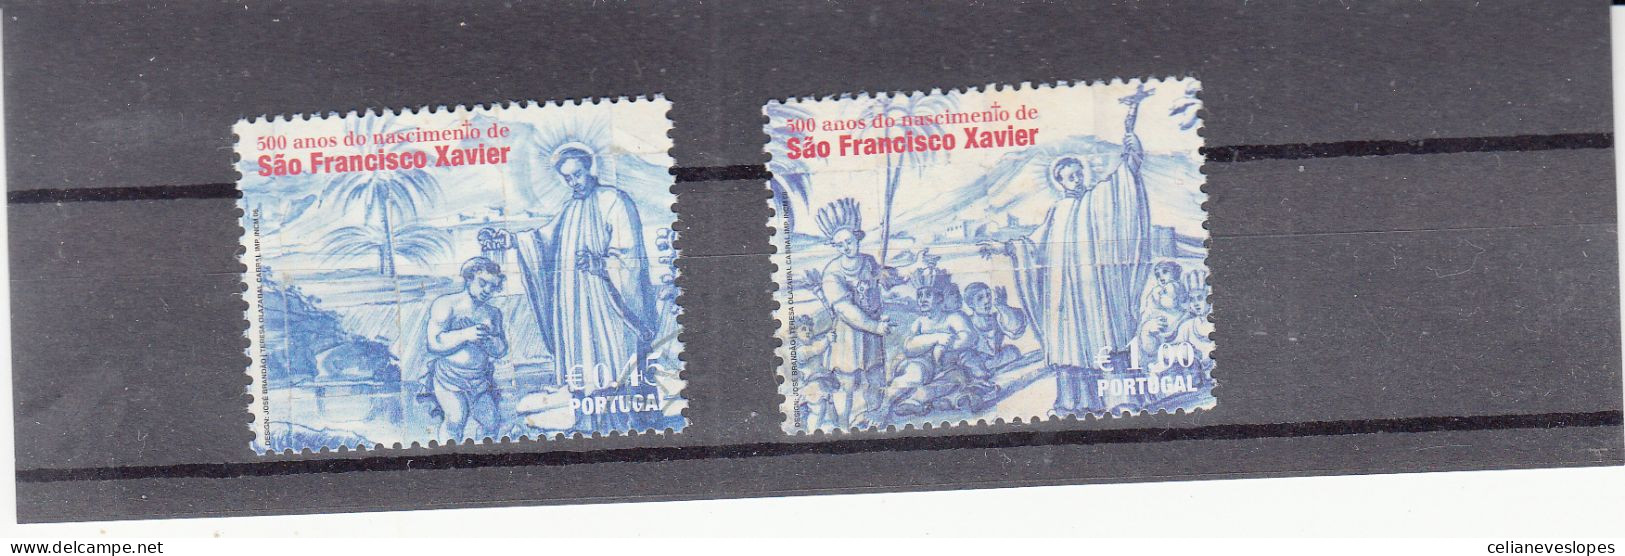 Portugal, (91), S. Francisco Xavier, 2006, Mundifil Nº 3391 A 3392 Used - Used Stamps